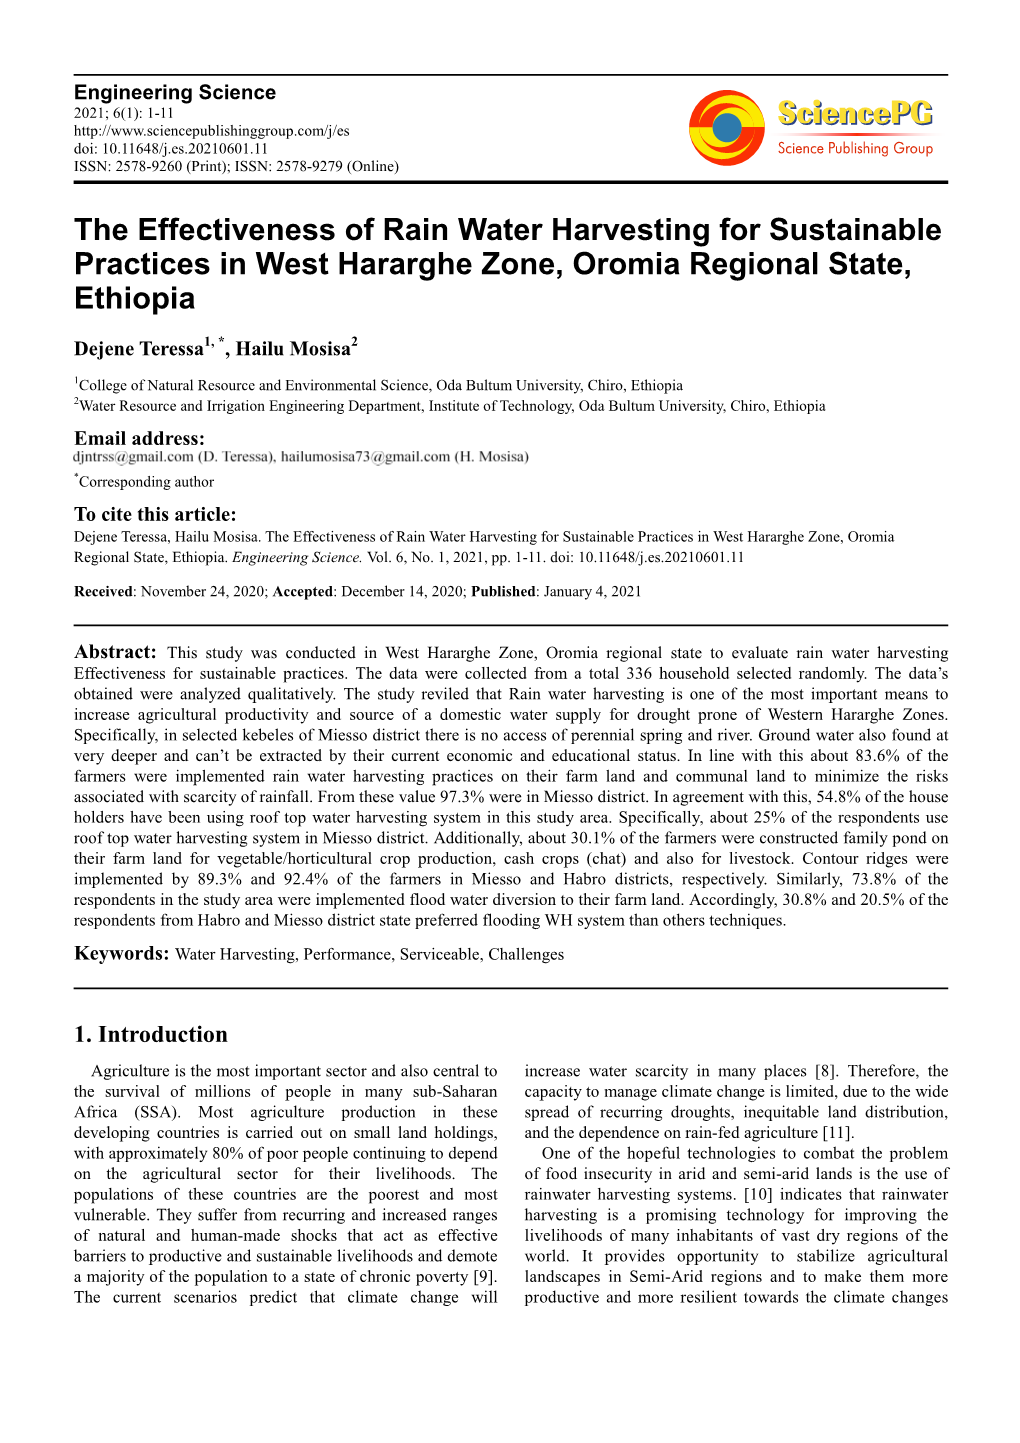 The Effectiveness of Rain Water Harvesting for Sustainable Practices in West Hararghe Zone, Oromia Regional State, Ethiopia